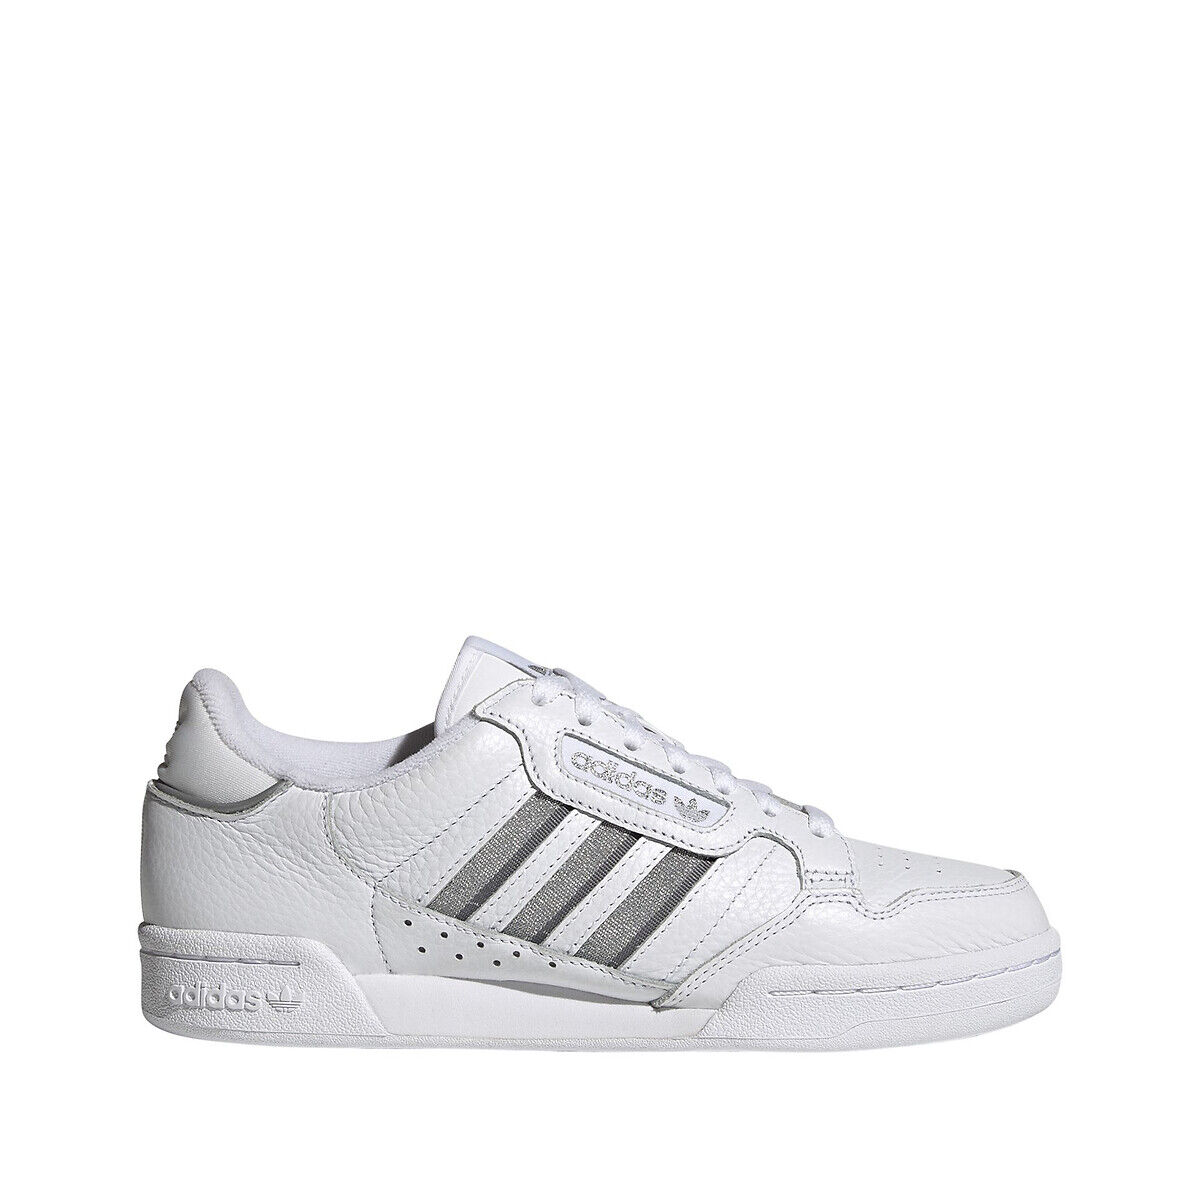 Adidas Ledersneakers Continental 80 WEISS